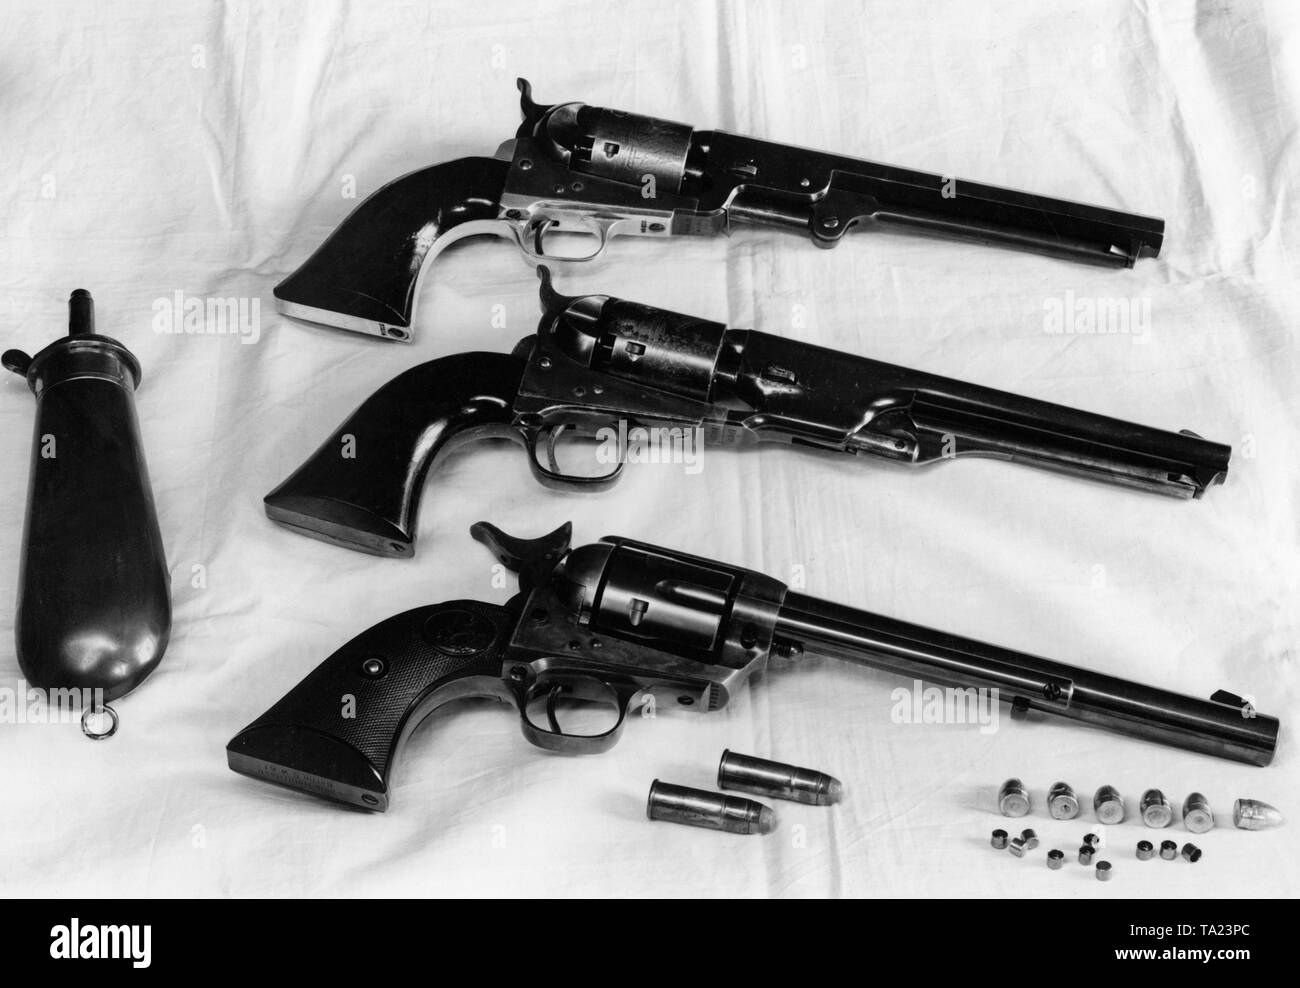 Colt revolver from the 19th century. Stock Photo